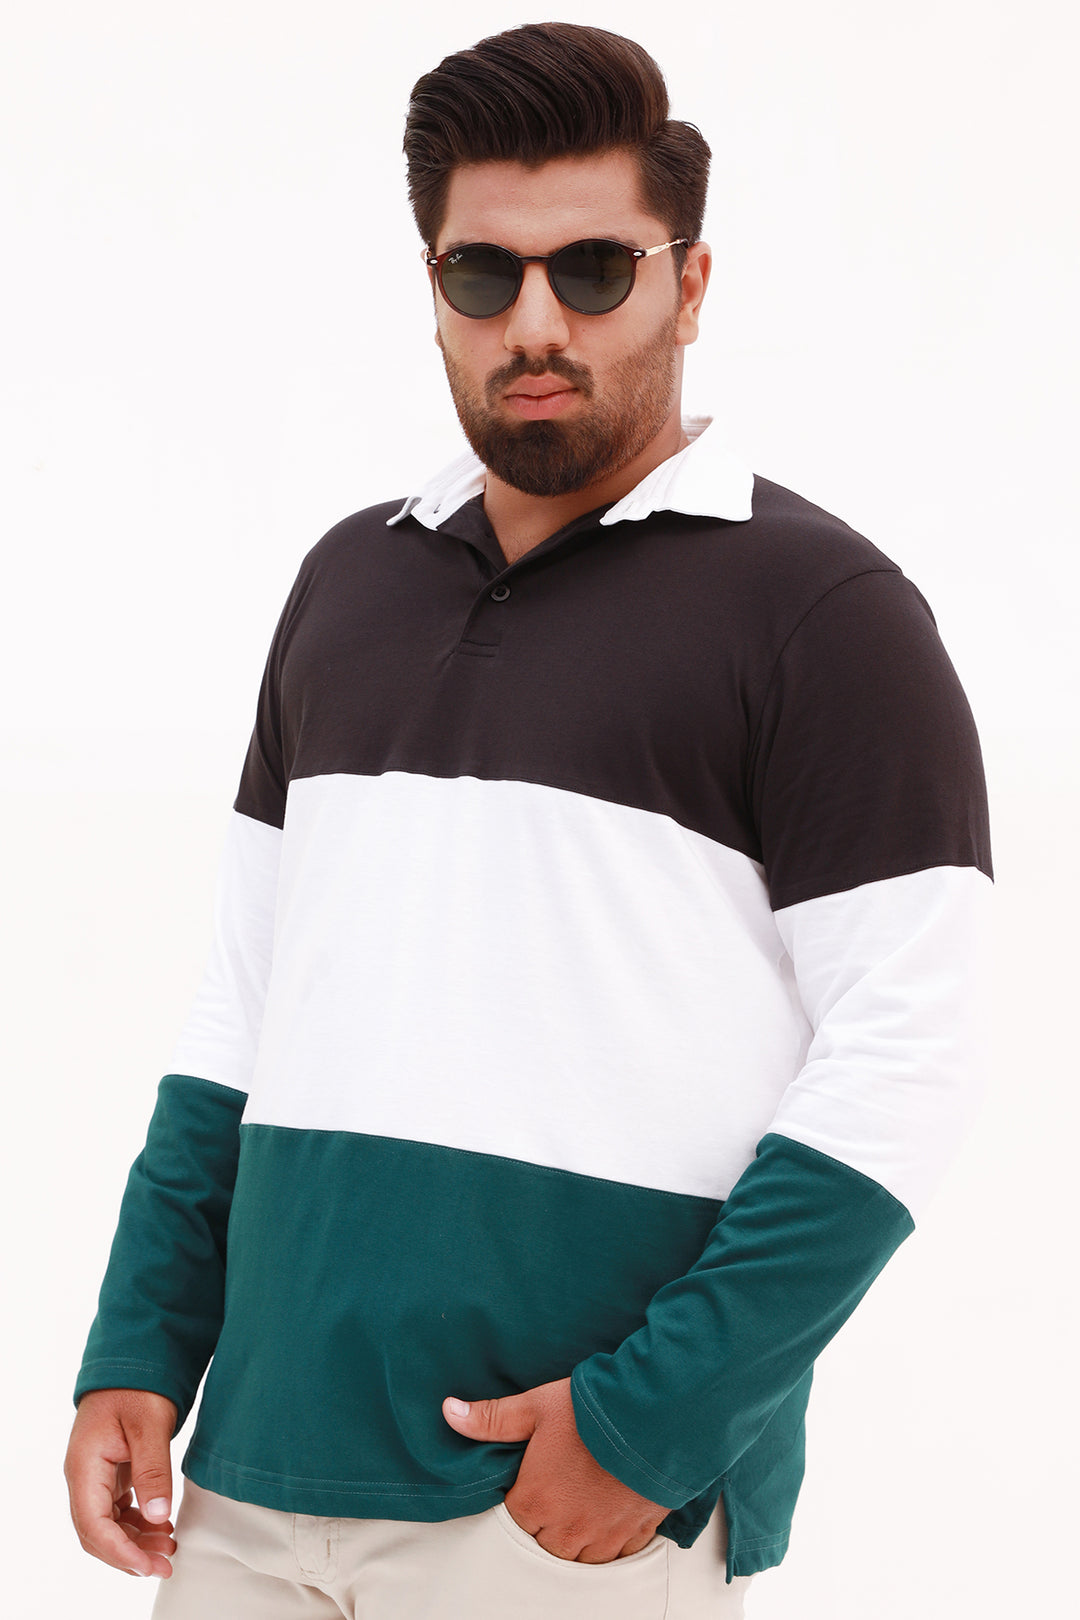 Teal Tri-Color Rugby Polo Shirt (Plus Size) - S22 - MP0118P